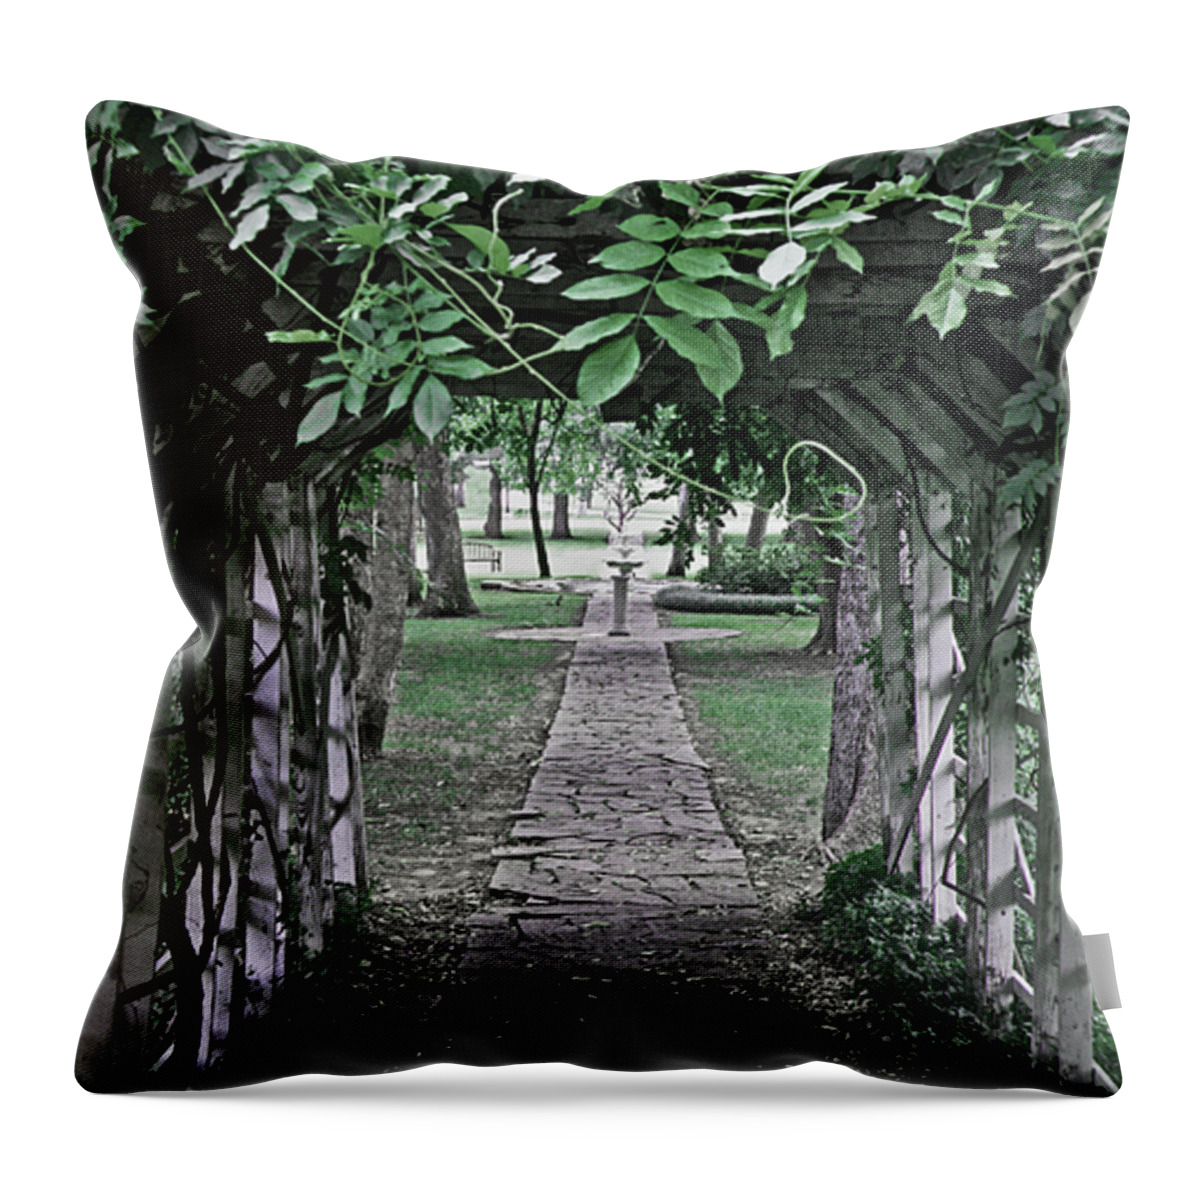 Trellis Throw Pillow featuring the photograph The Other Side by Donna Shahan